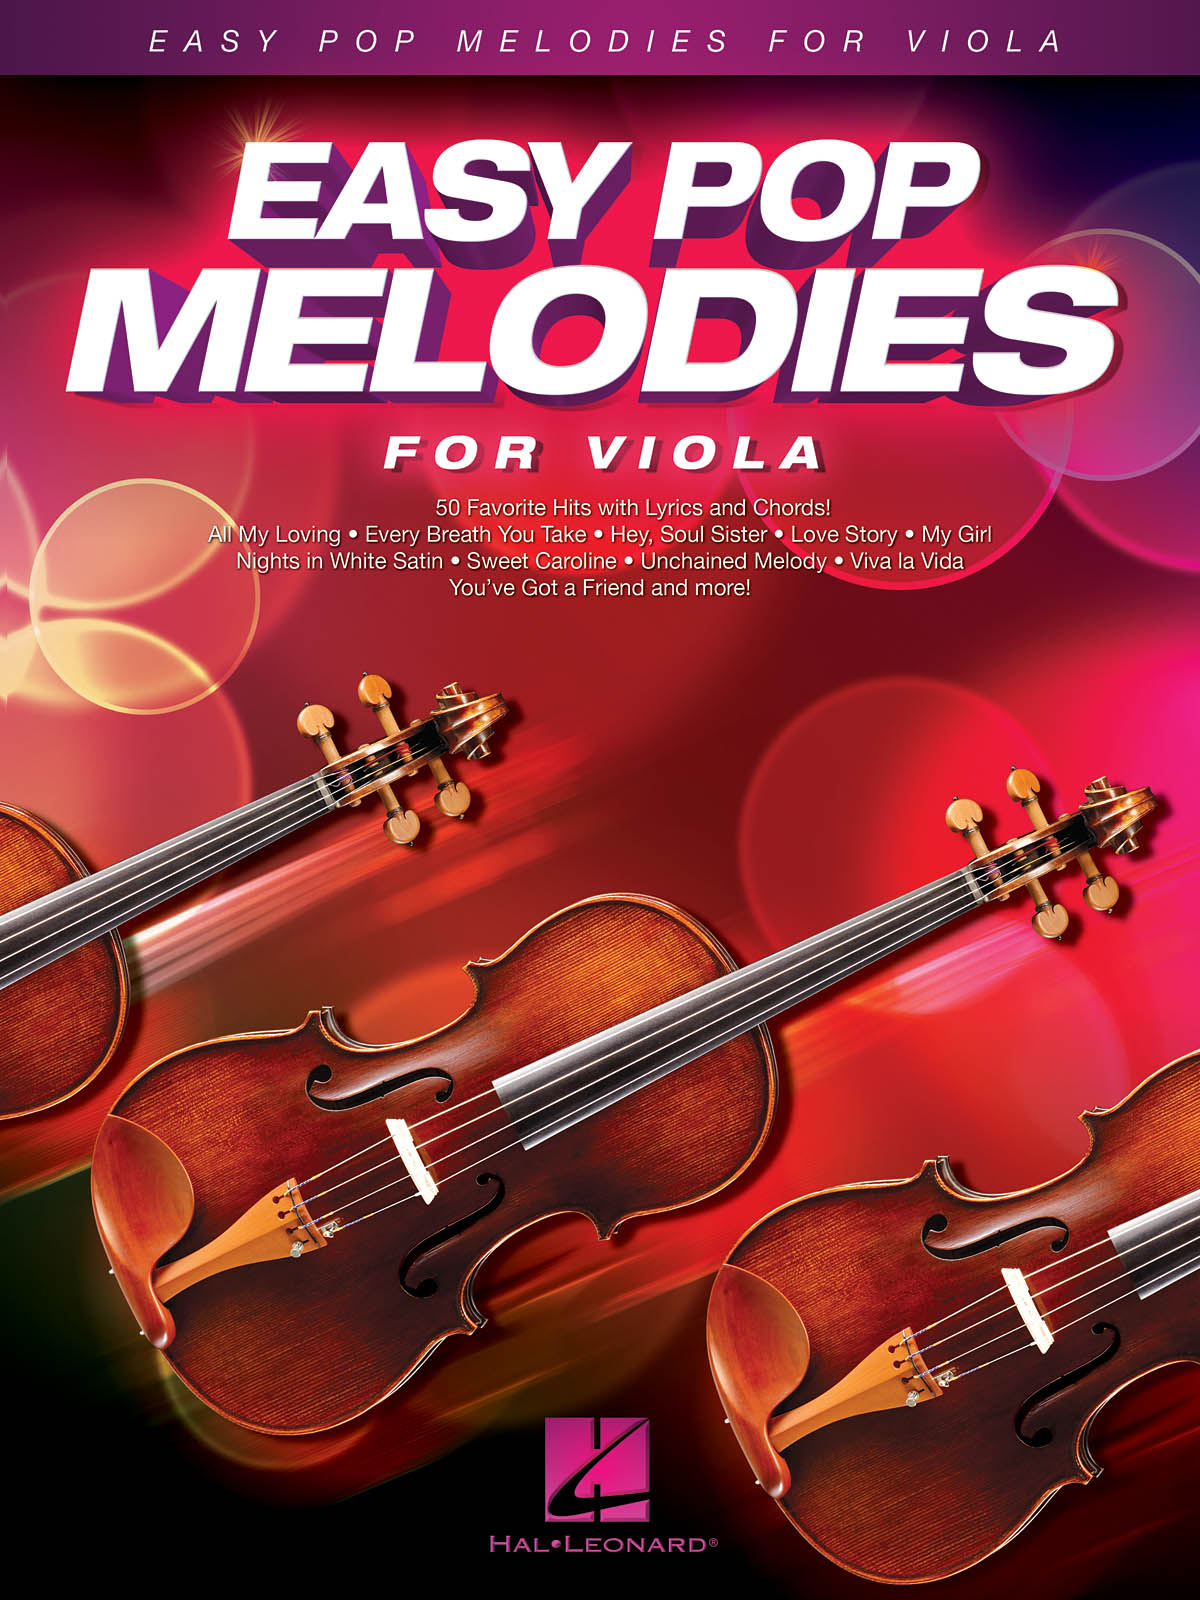 Easy Pop Melodies pro violu 50 Favorite Hits with Lyrics and Chords